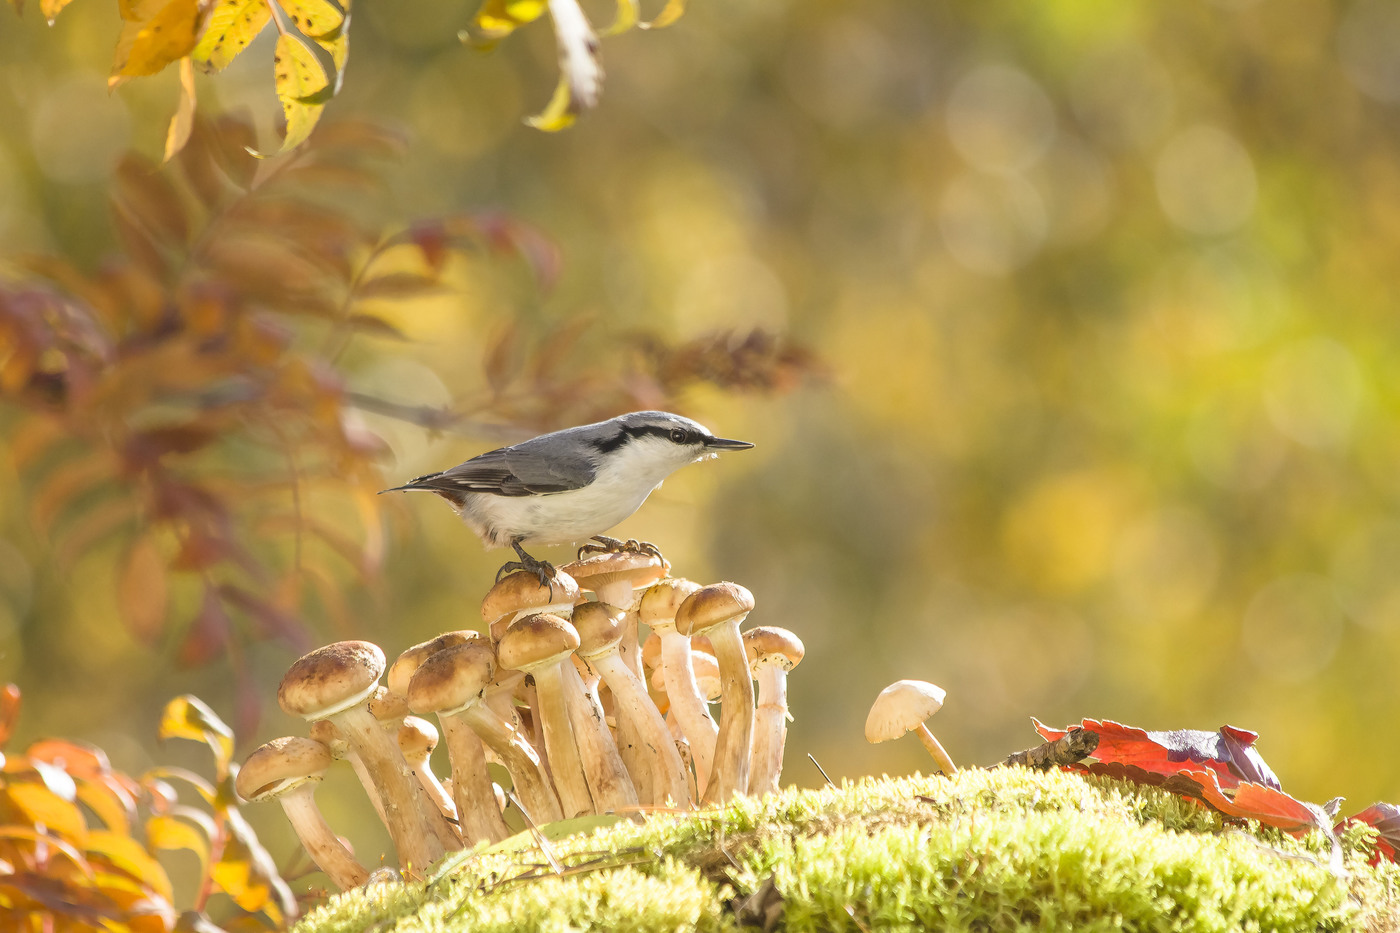 Nuthatch poses on mushrooms